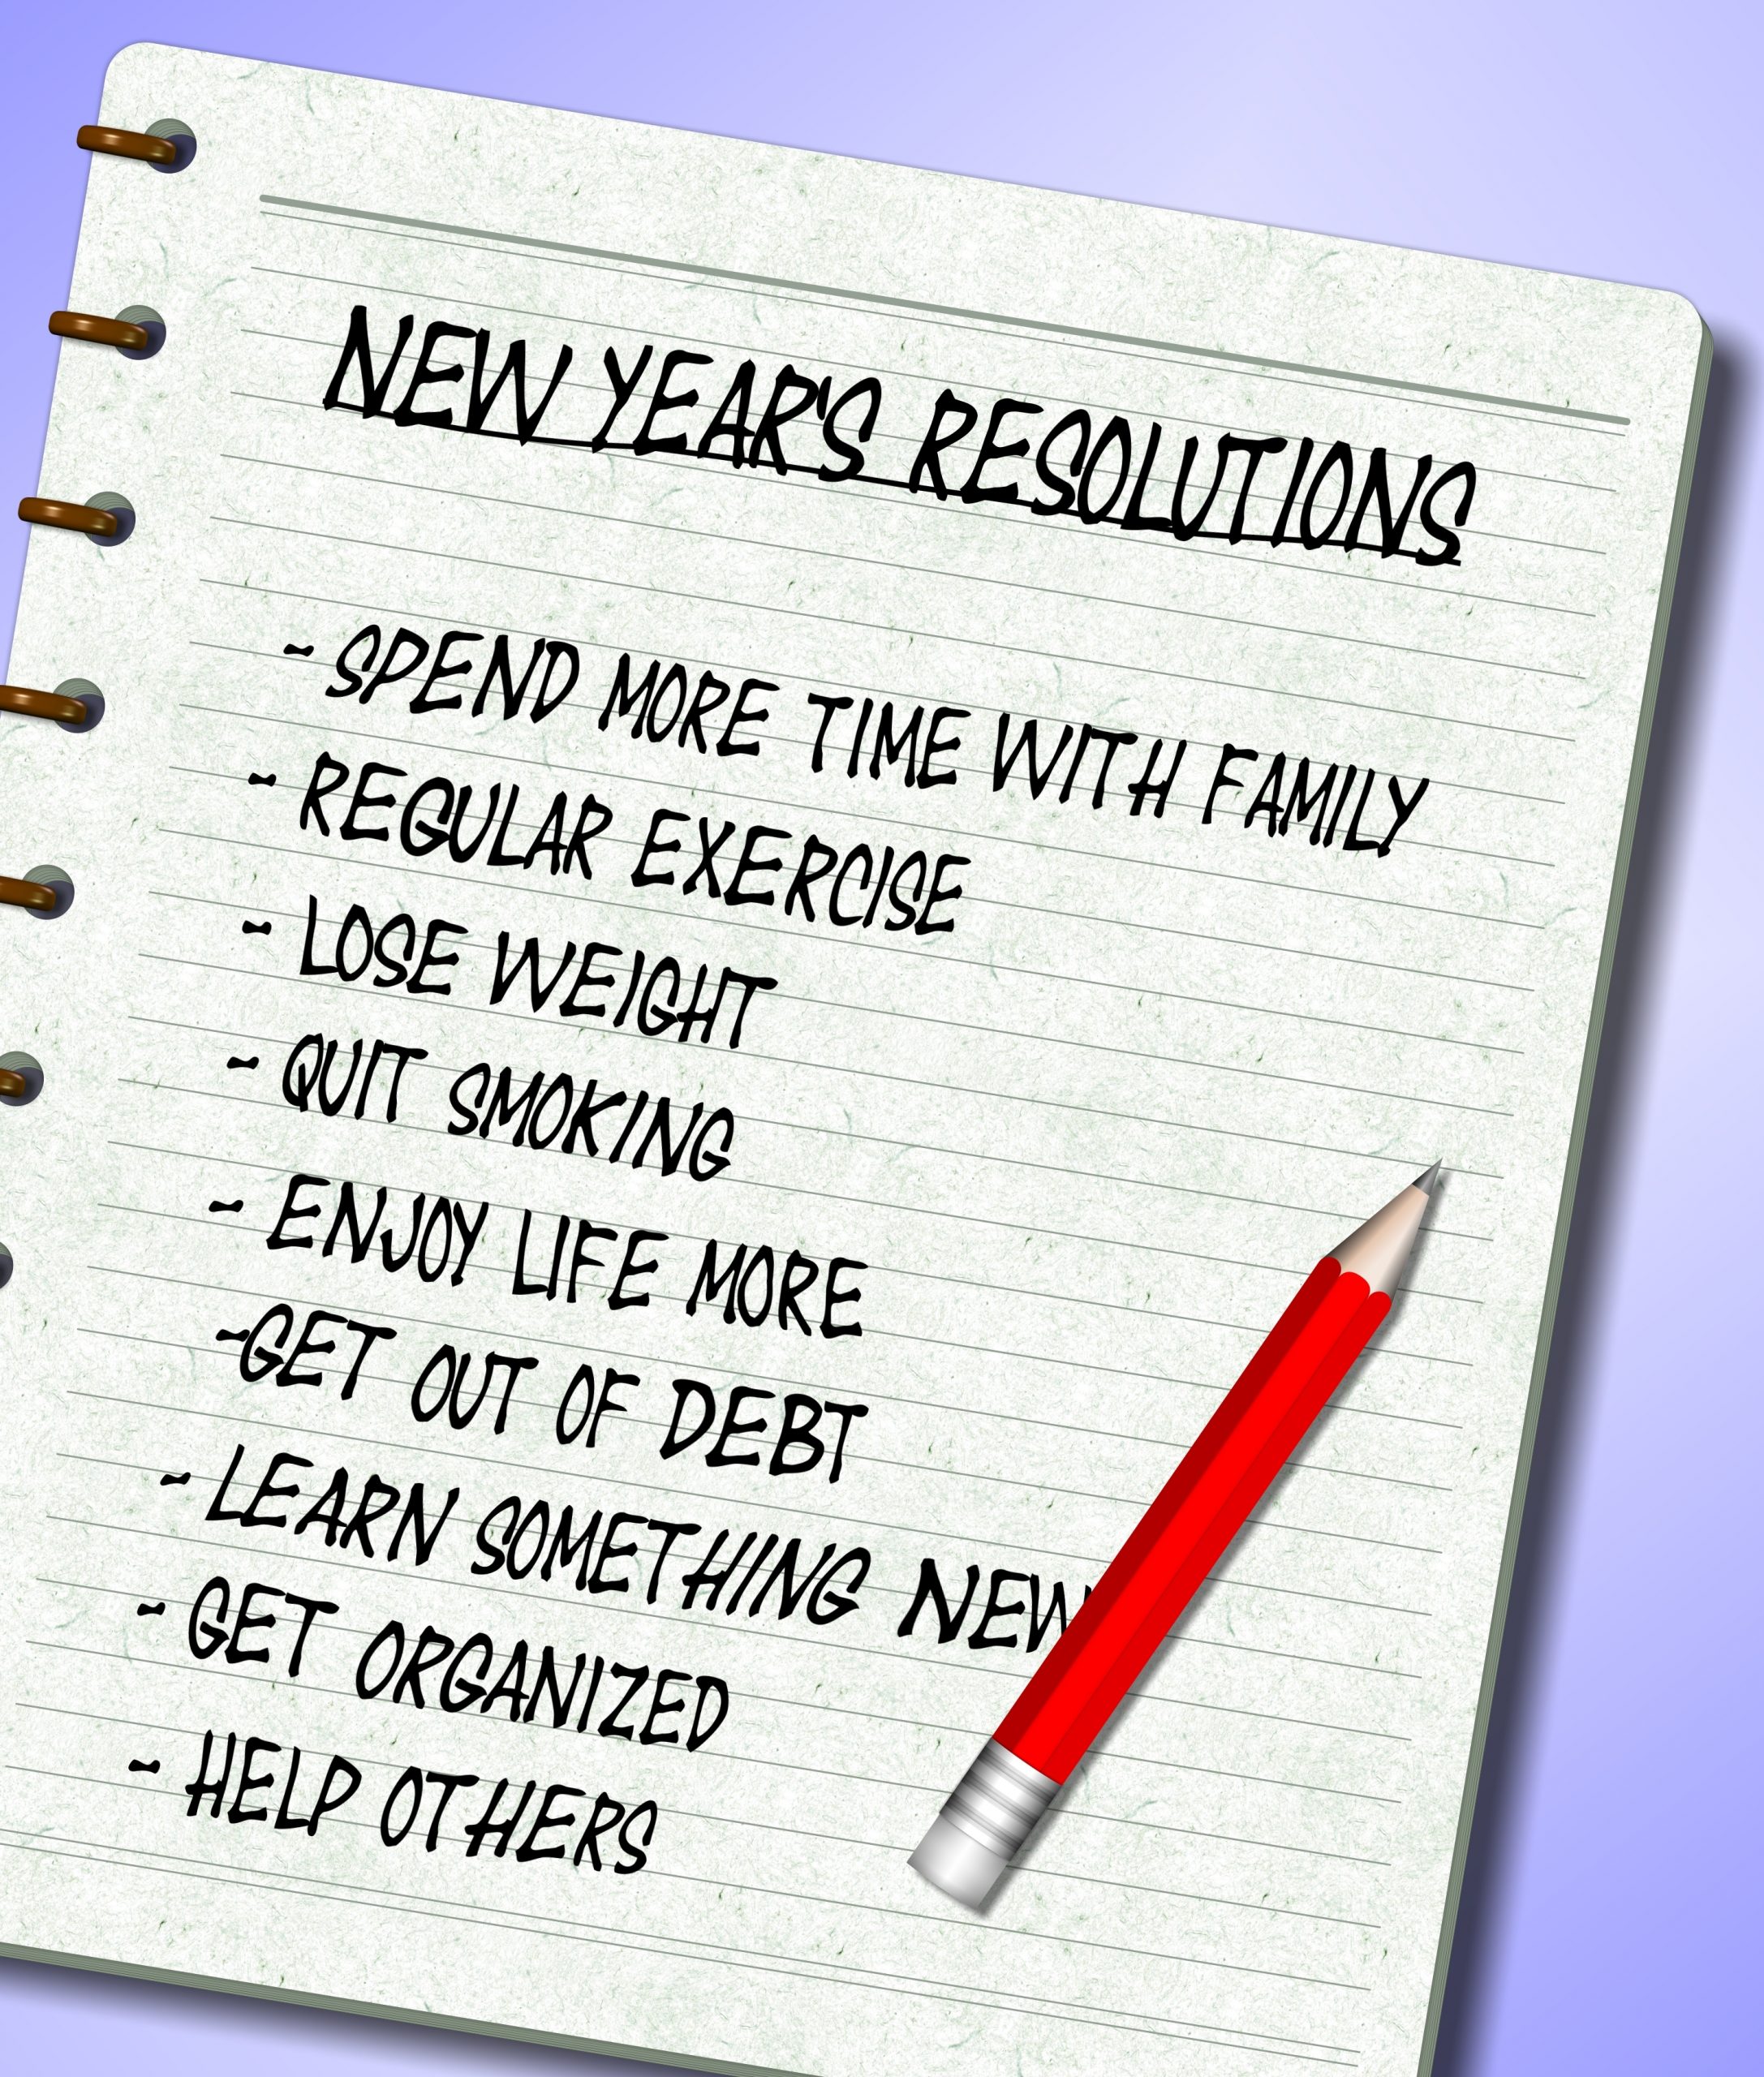 SLM What Is Your New Year's Resolution?